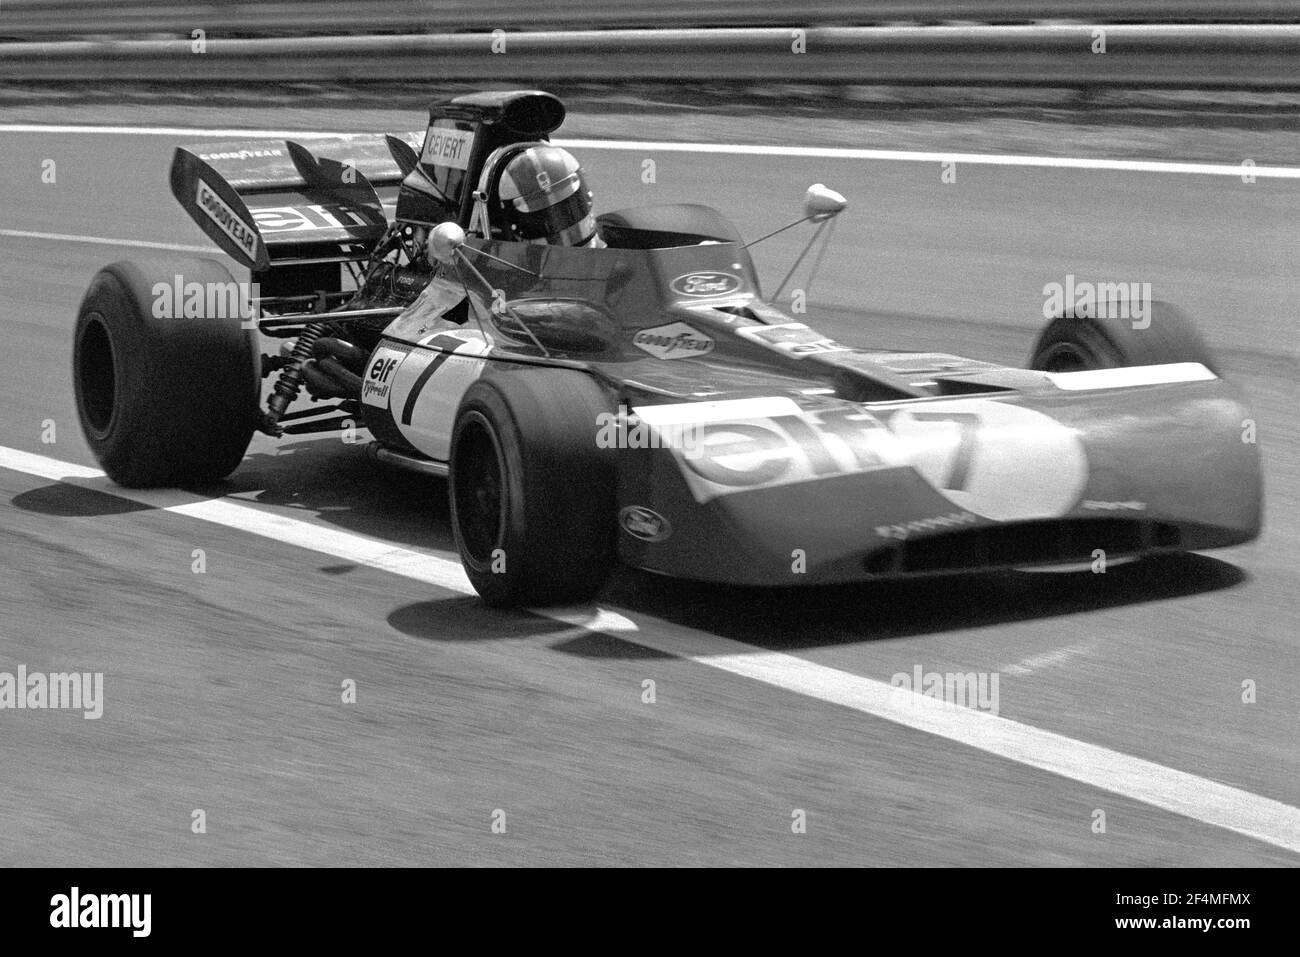 François CEVERTdriving Tyrrell-Ford F1 car in full speed during 1972 Grand Prix de France, in Charade circuit near Clermont-Ferrand. Stock Photo